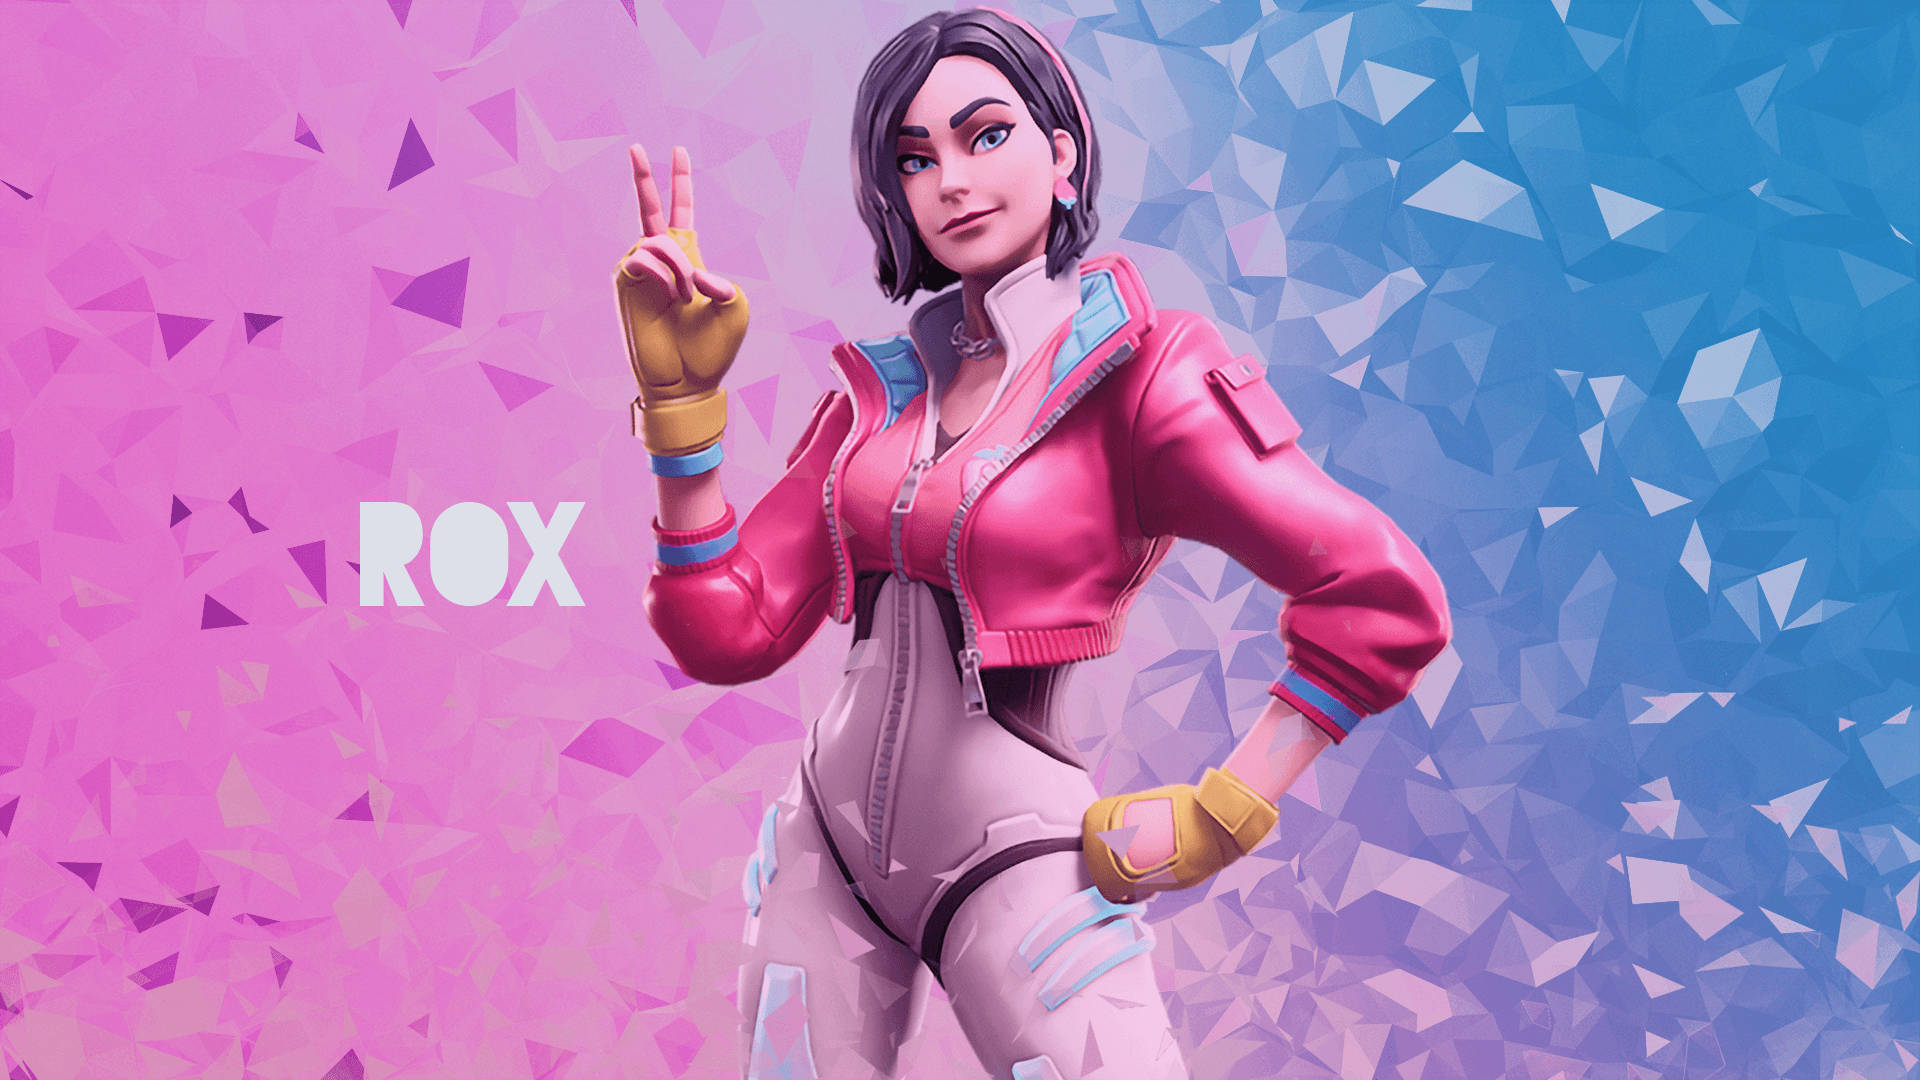 "A Female Gamer Redefining The Meaning of Victory Royale" Wallpaper